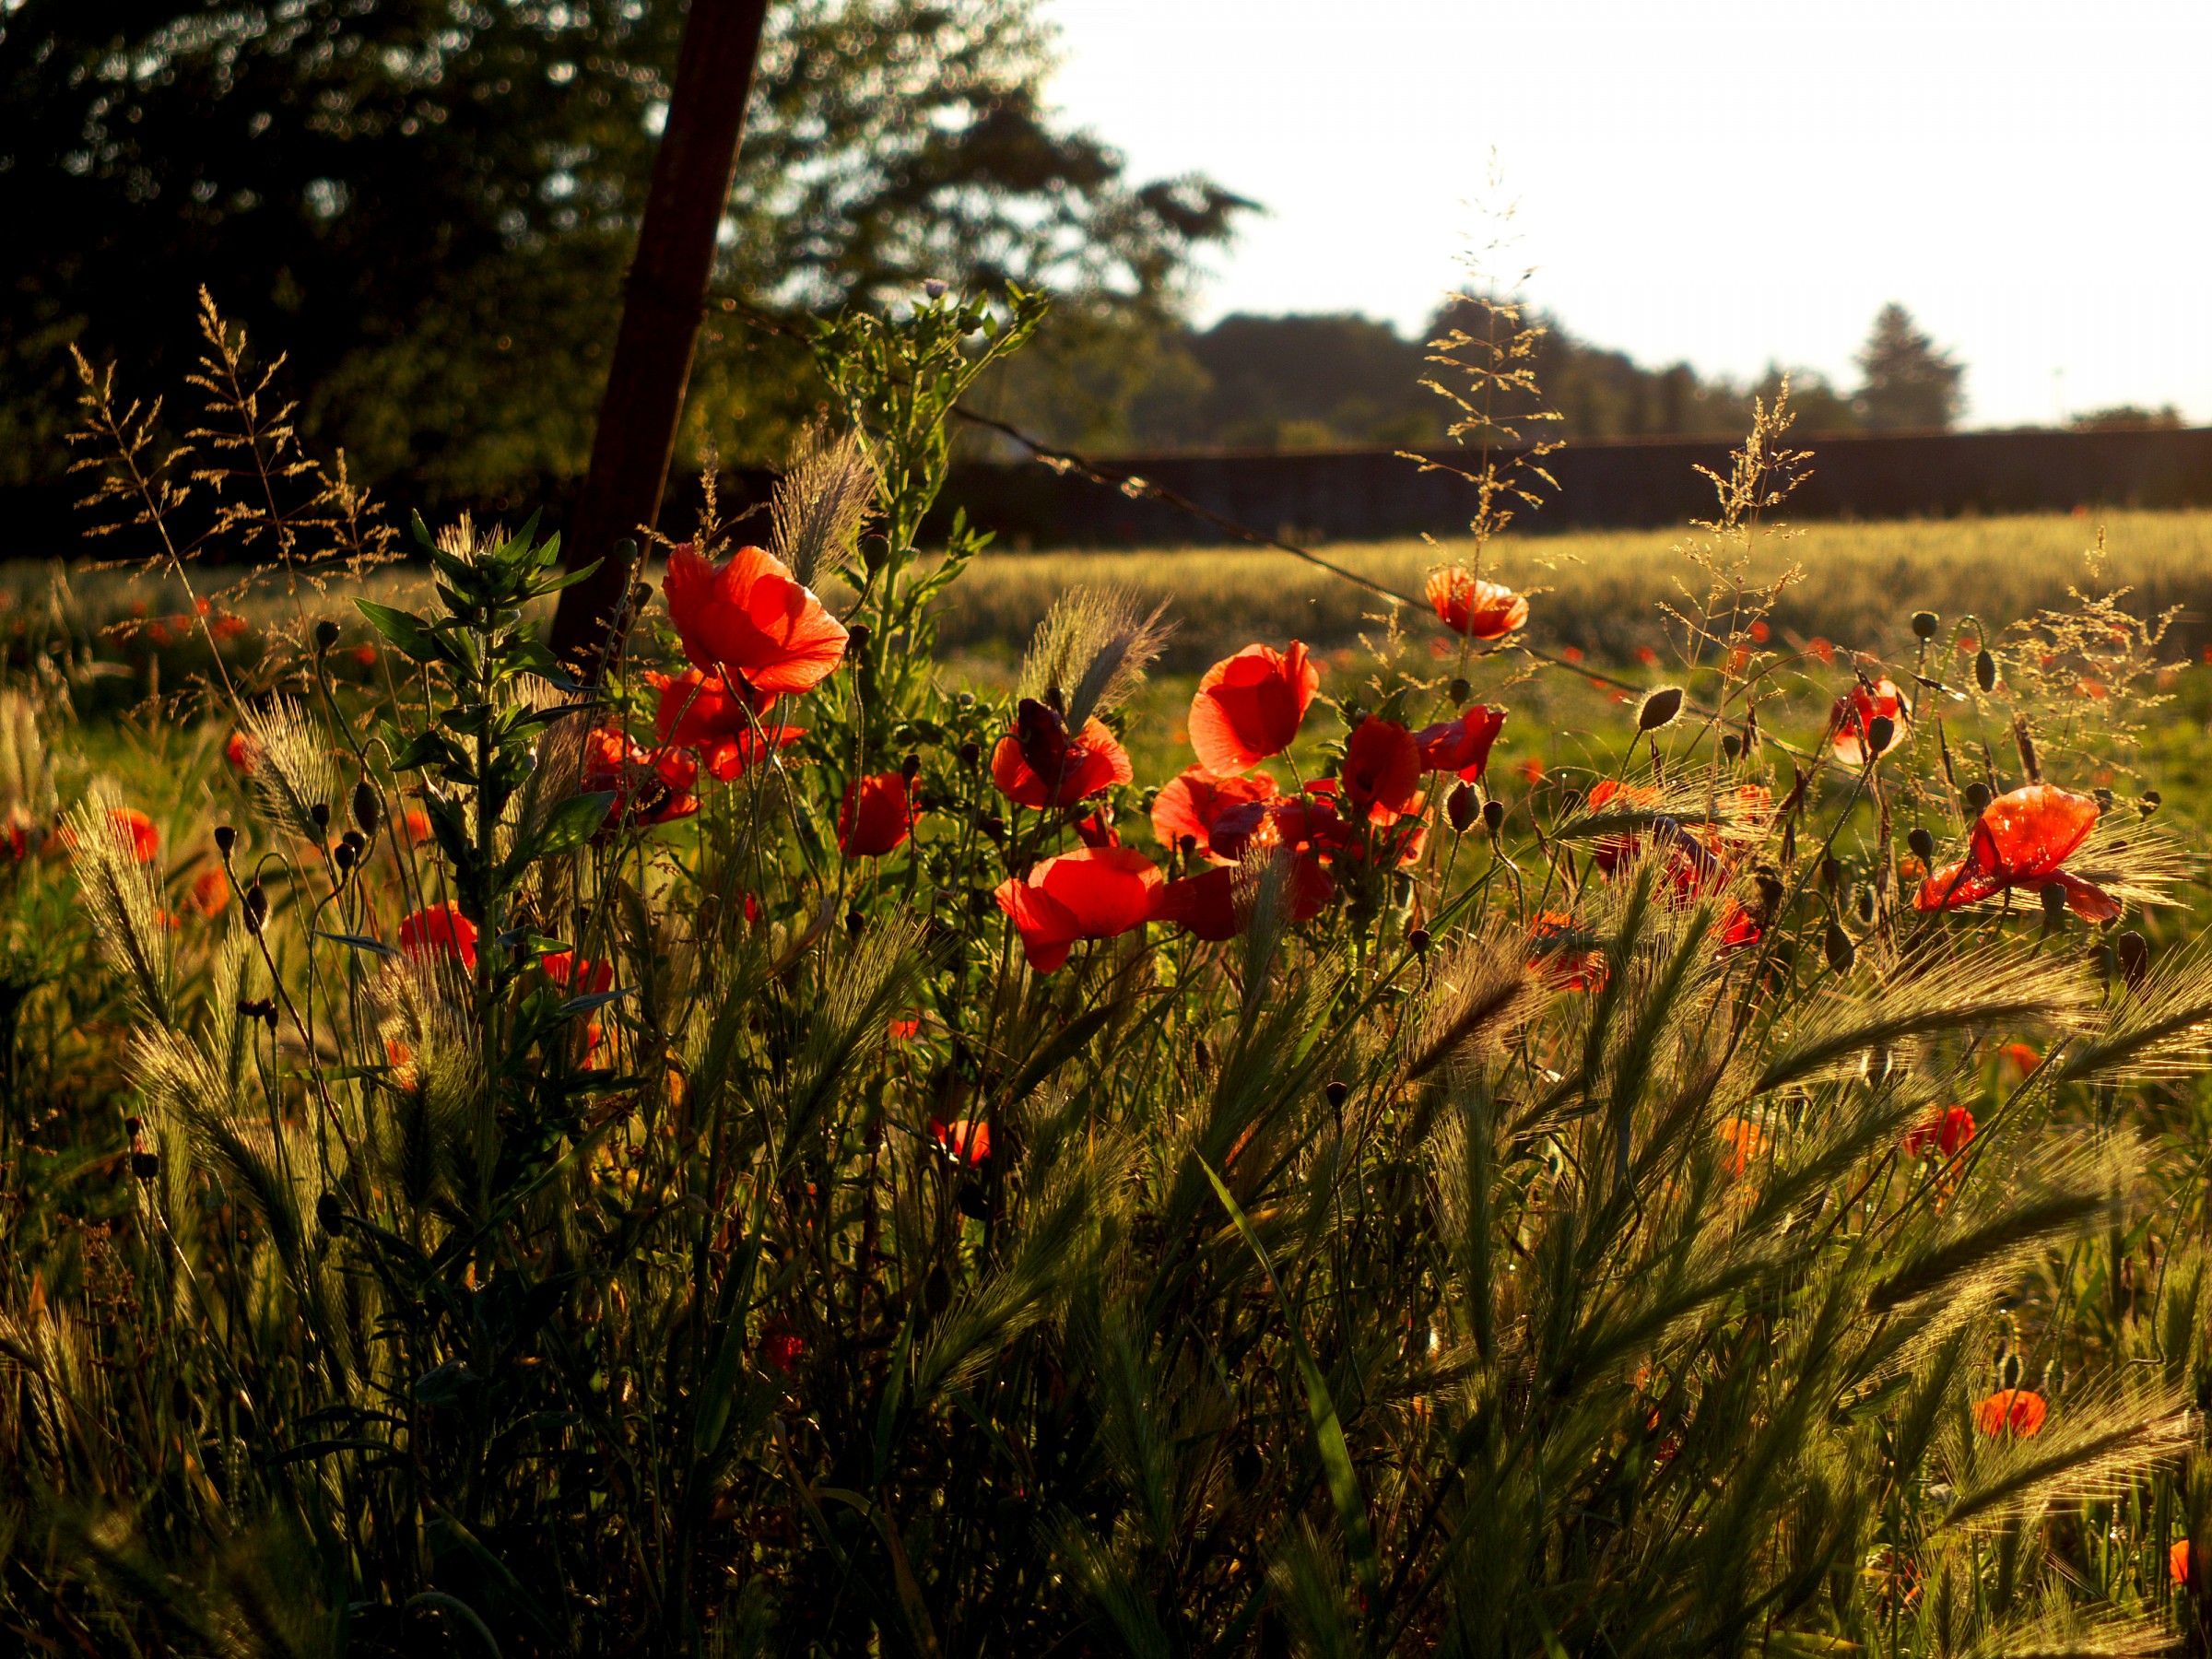 Poppies stand out in the light of sunset...